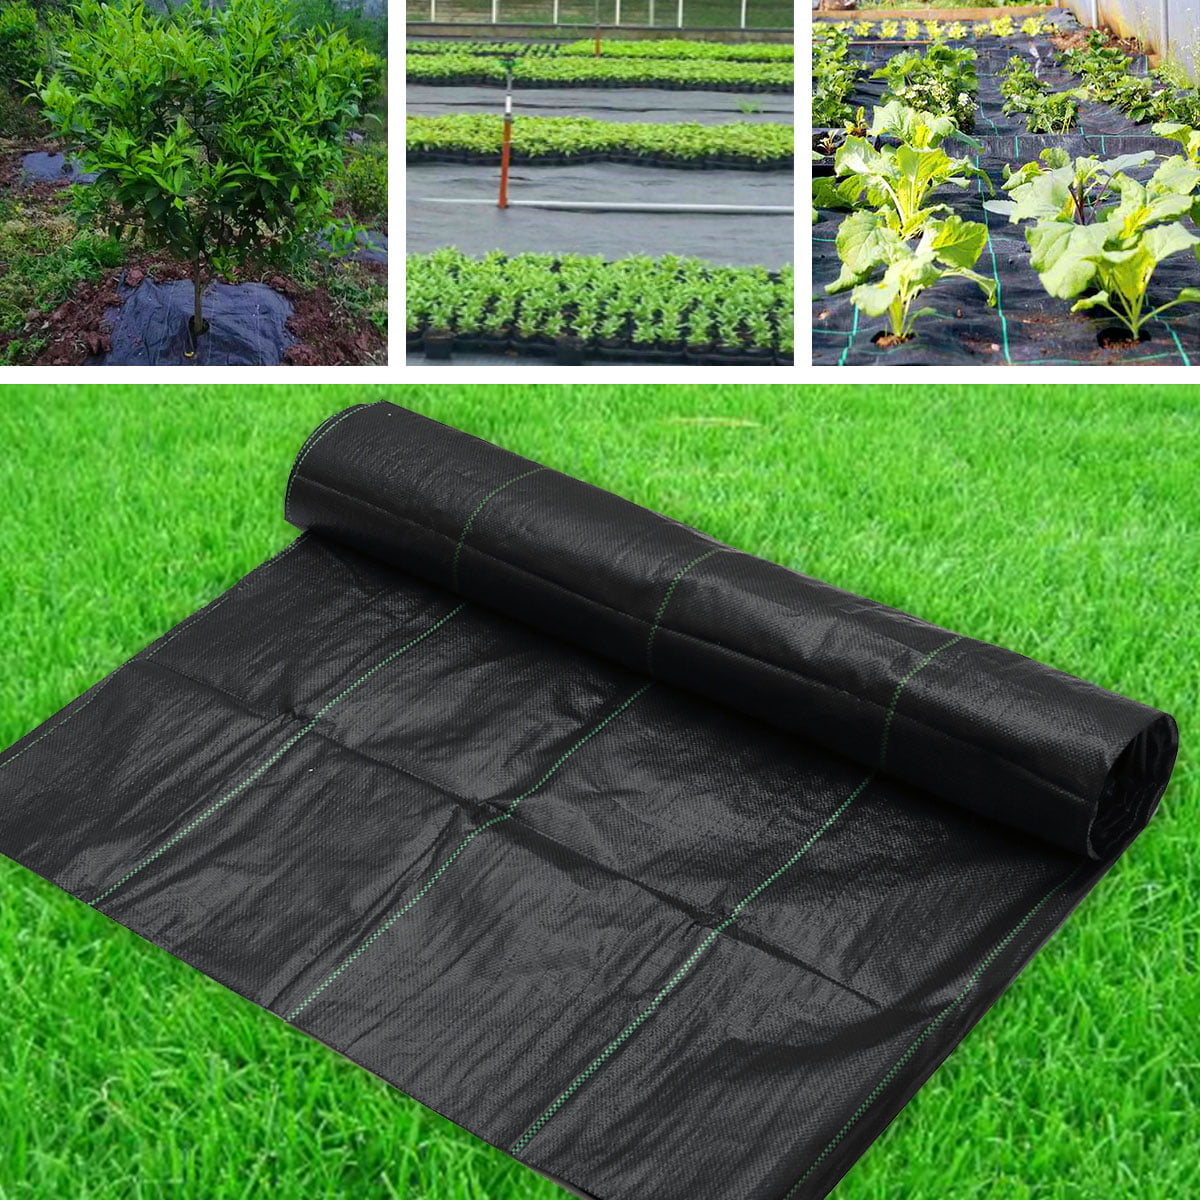 5oz Weed Barrier Landscaping Fabric 6ft x 30ft Heavy Duty Garden Weed Control Block Fabric Cloth Mat Woven Grass Ground Cover for Lawn Vegetable Outdoor 